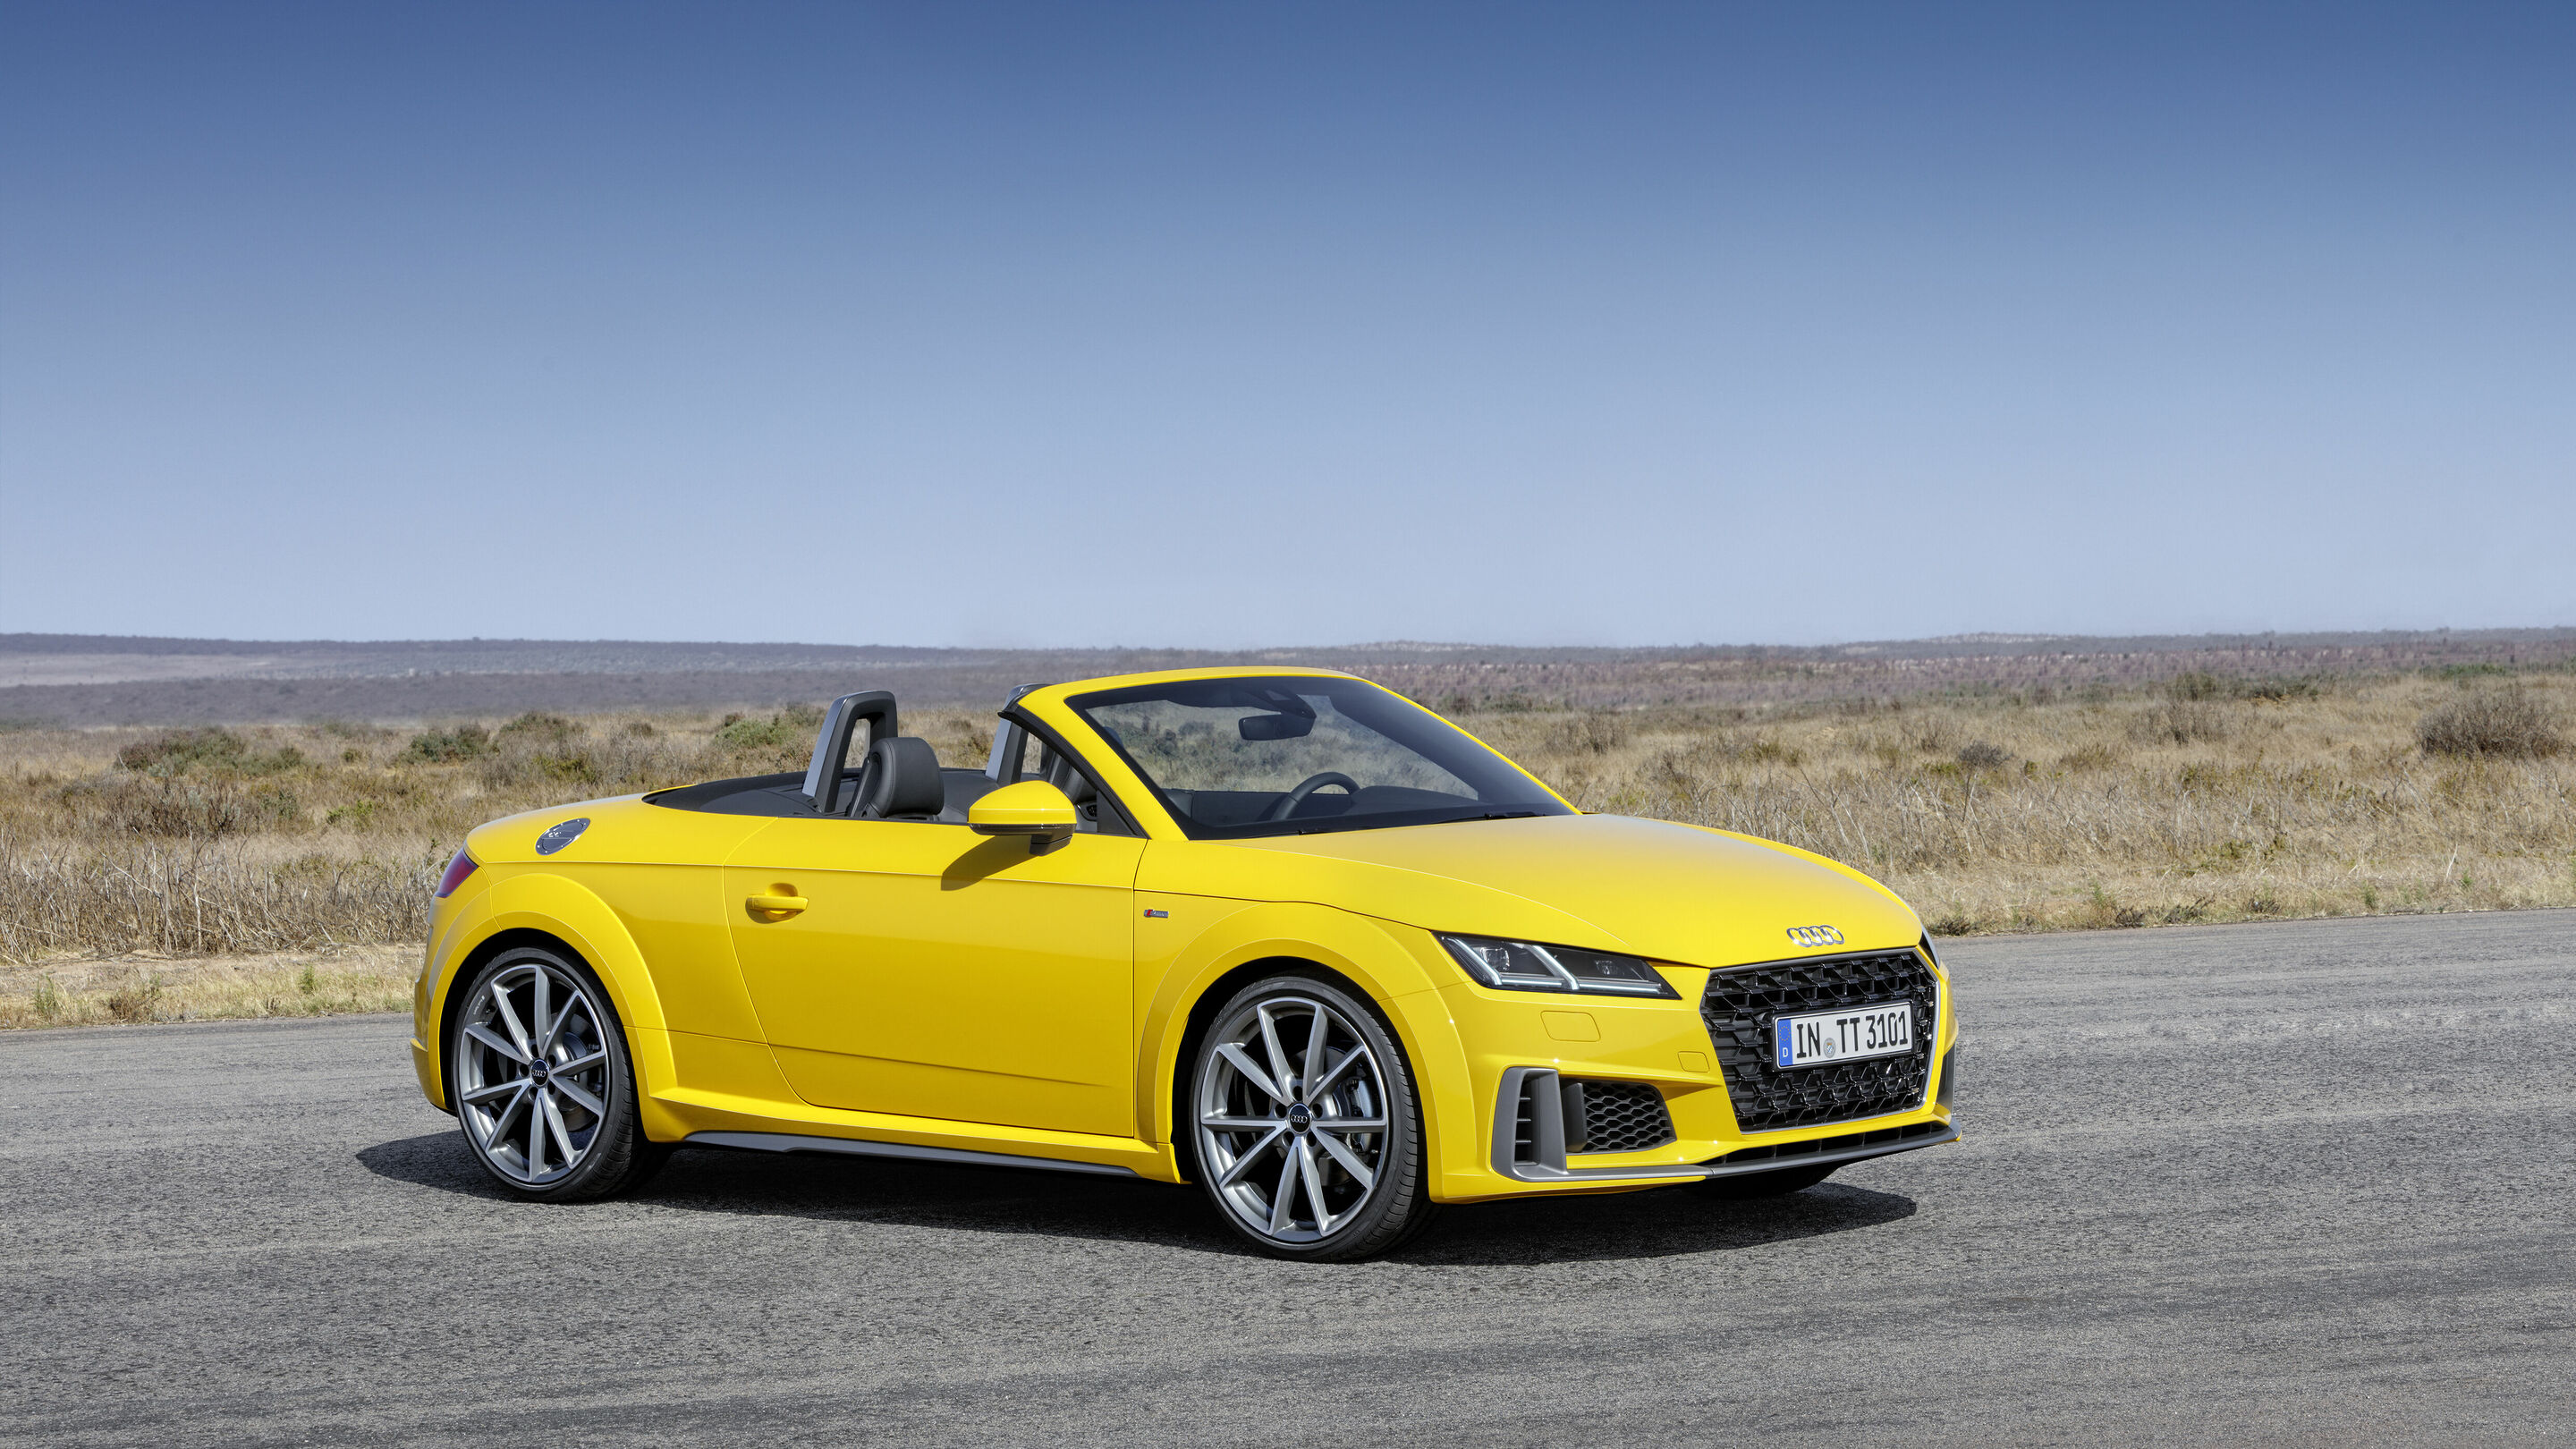 The new Audi TT – an update for the design icon